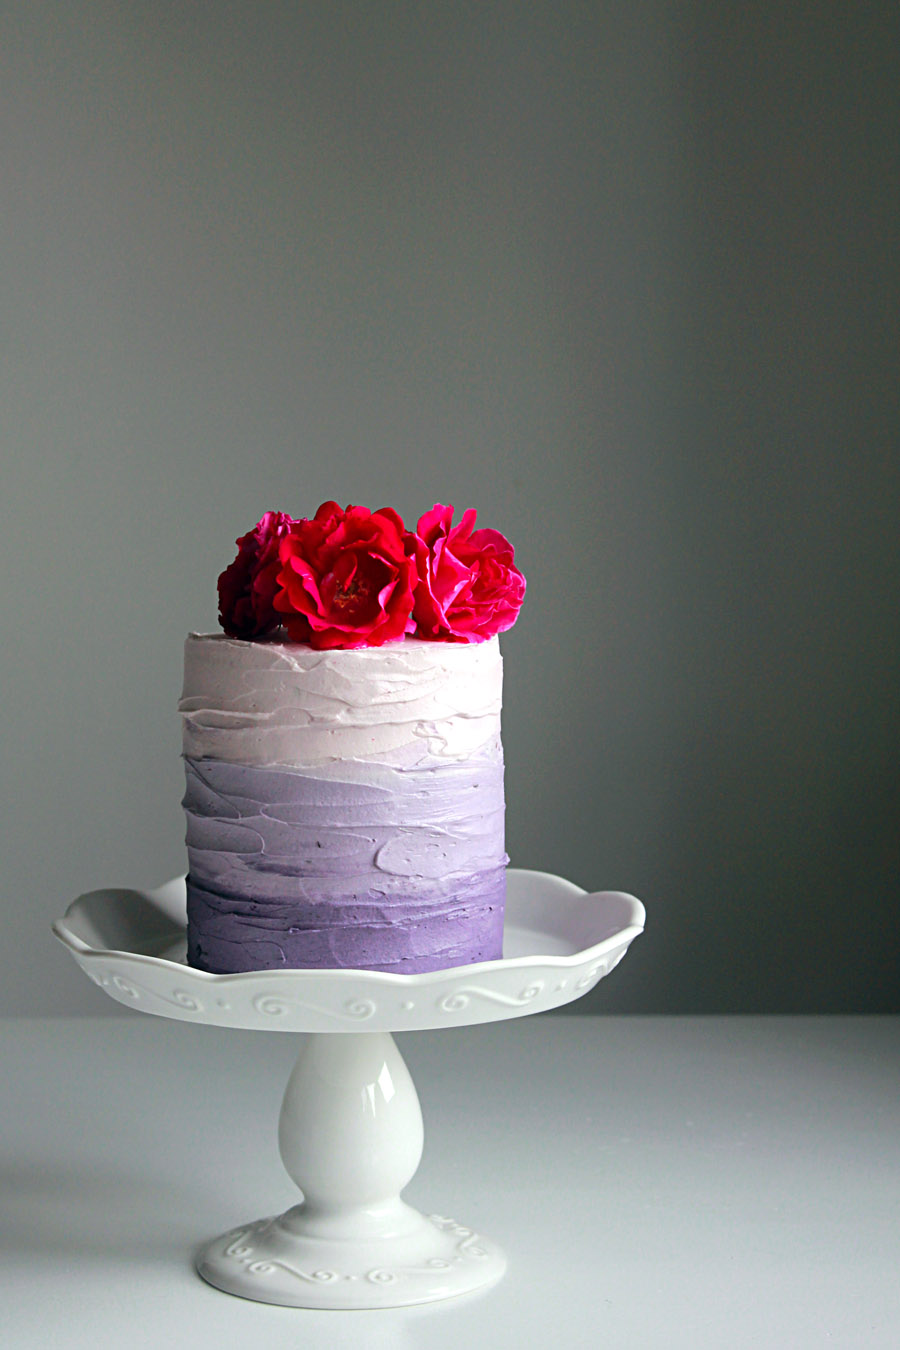 Chocolate Zucchini Cake with Blackberry Buttercream - Simply So Good